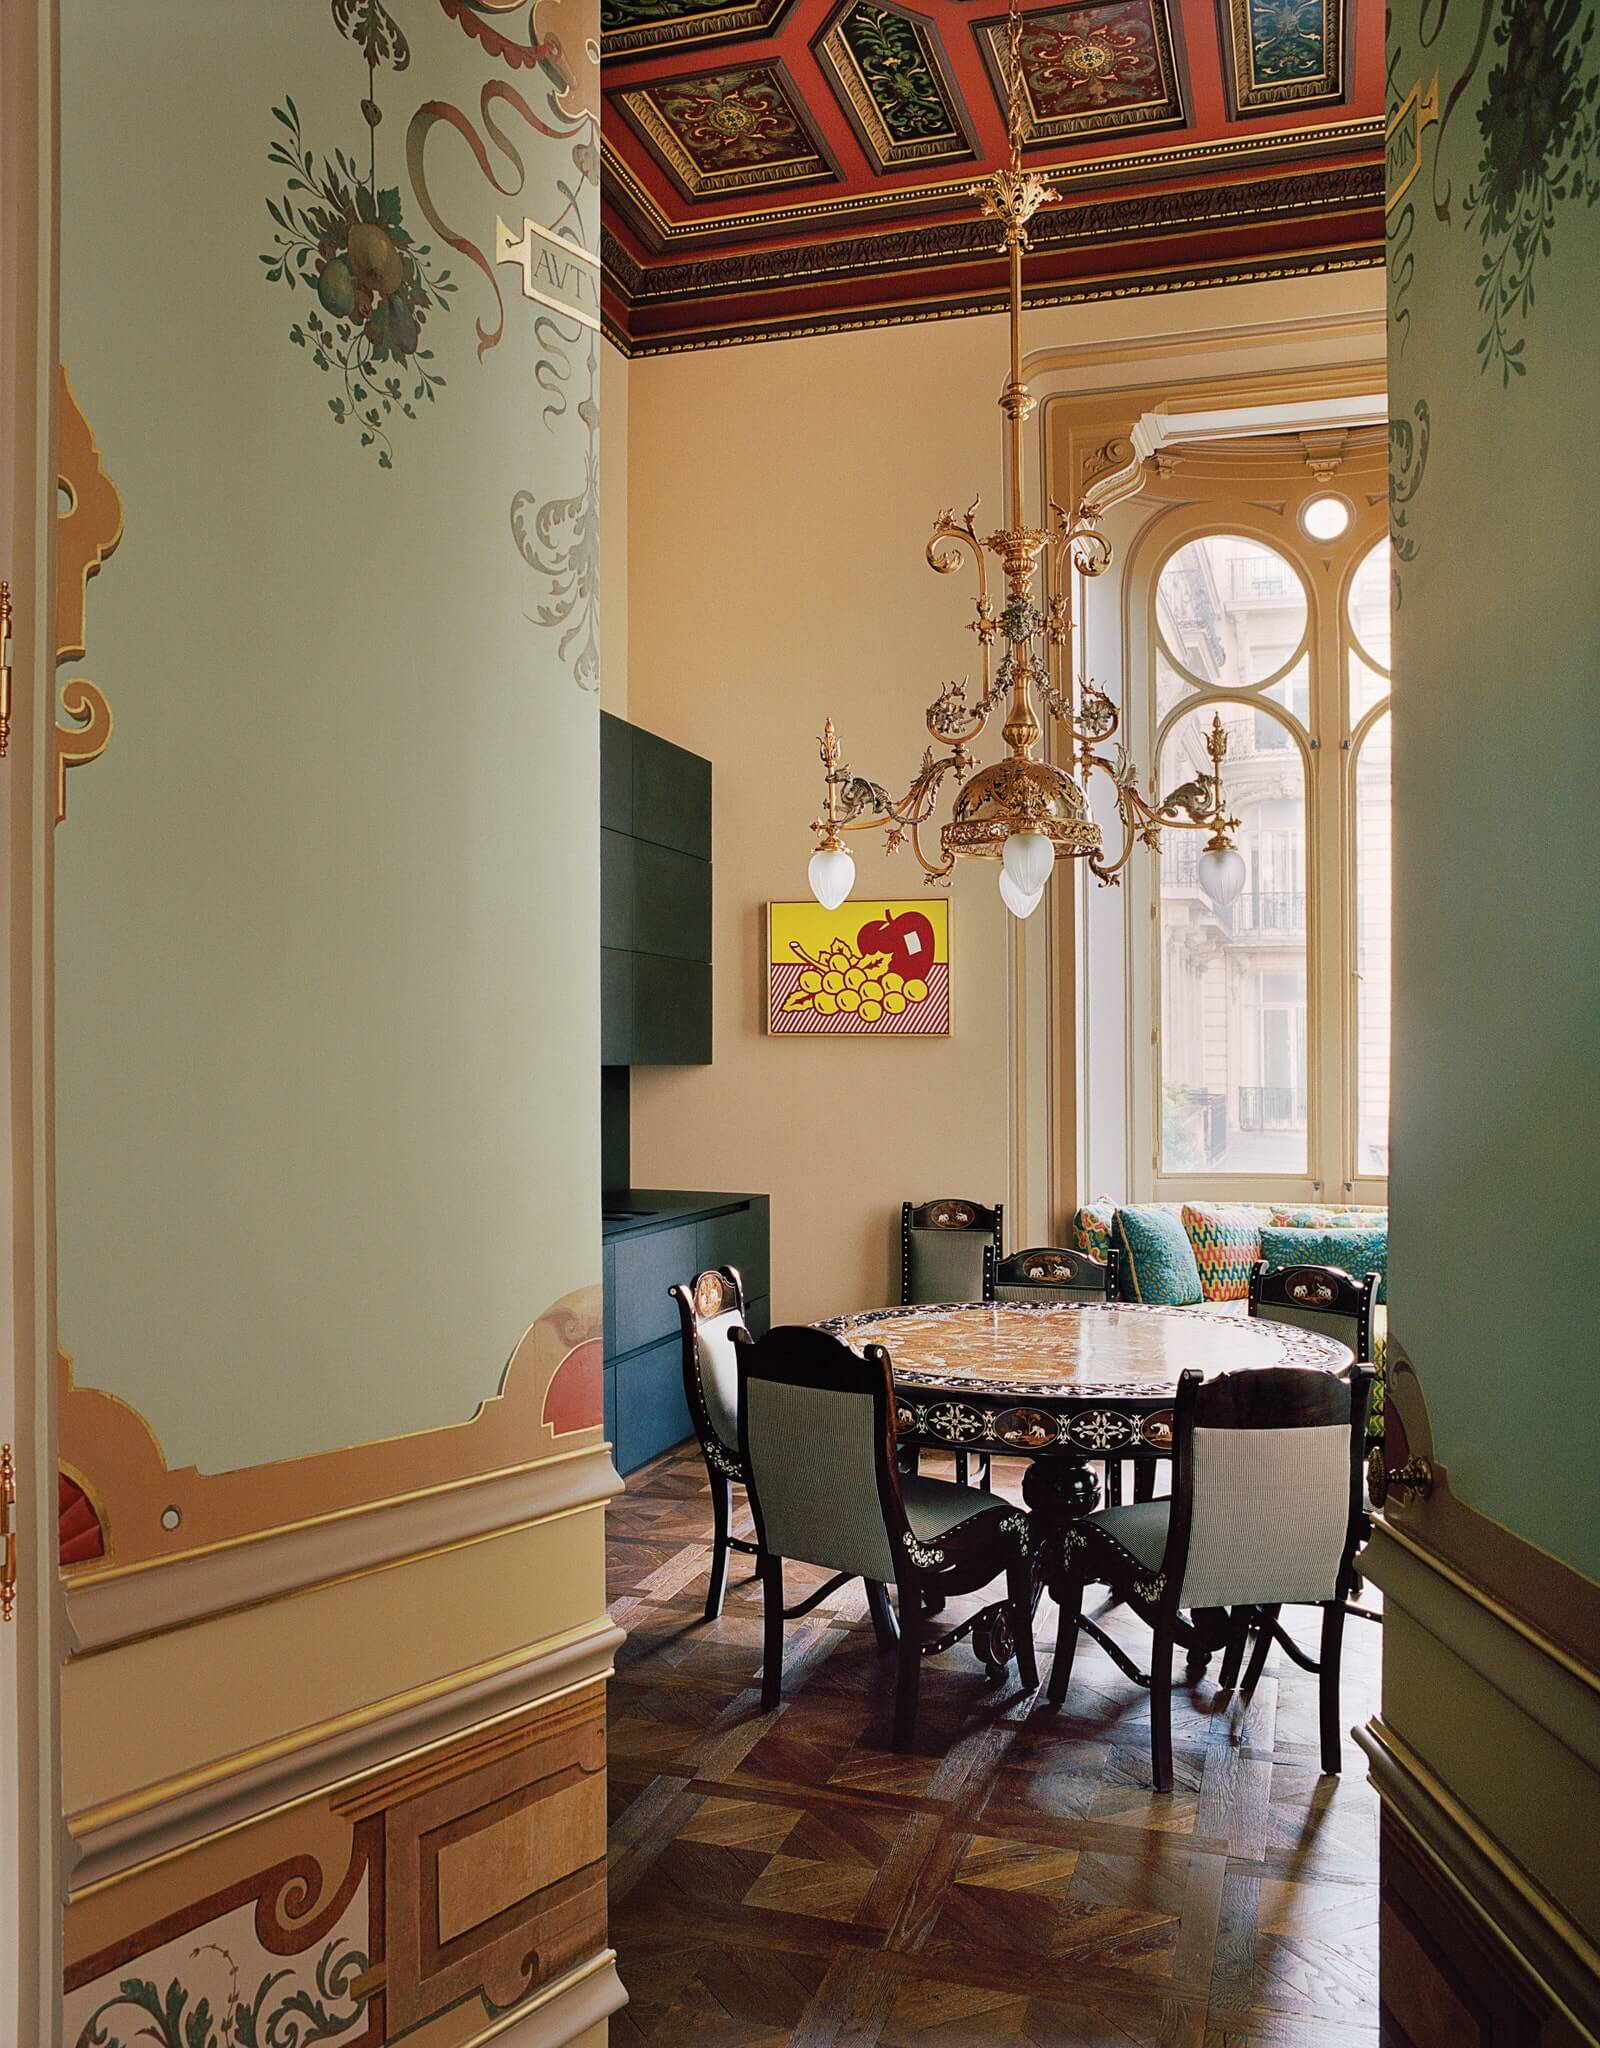 Historical Mansion decored in maximalist home decor